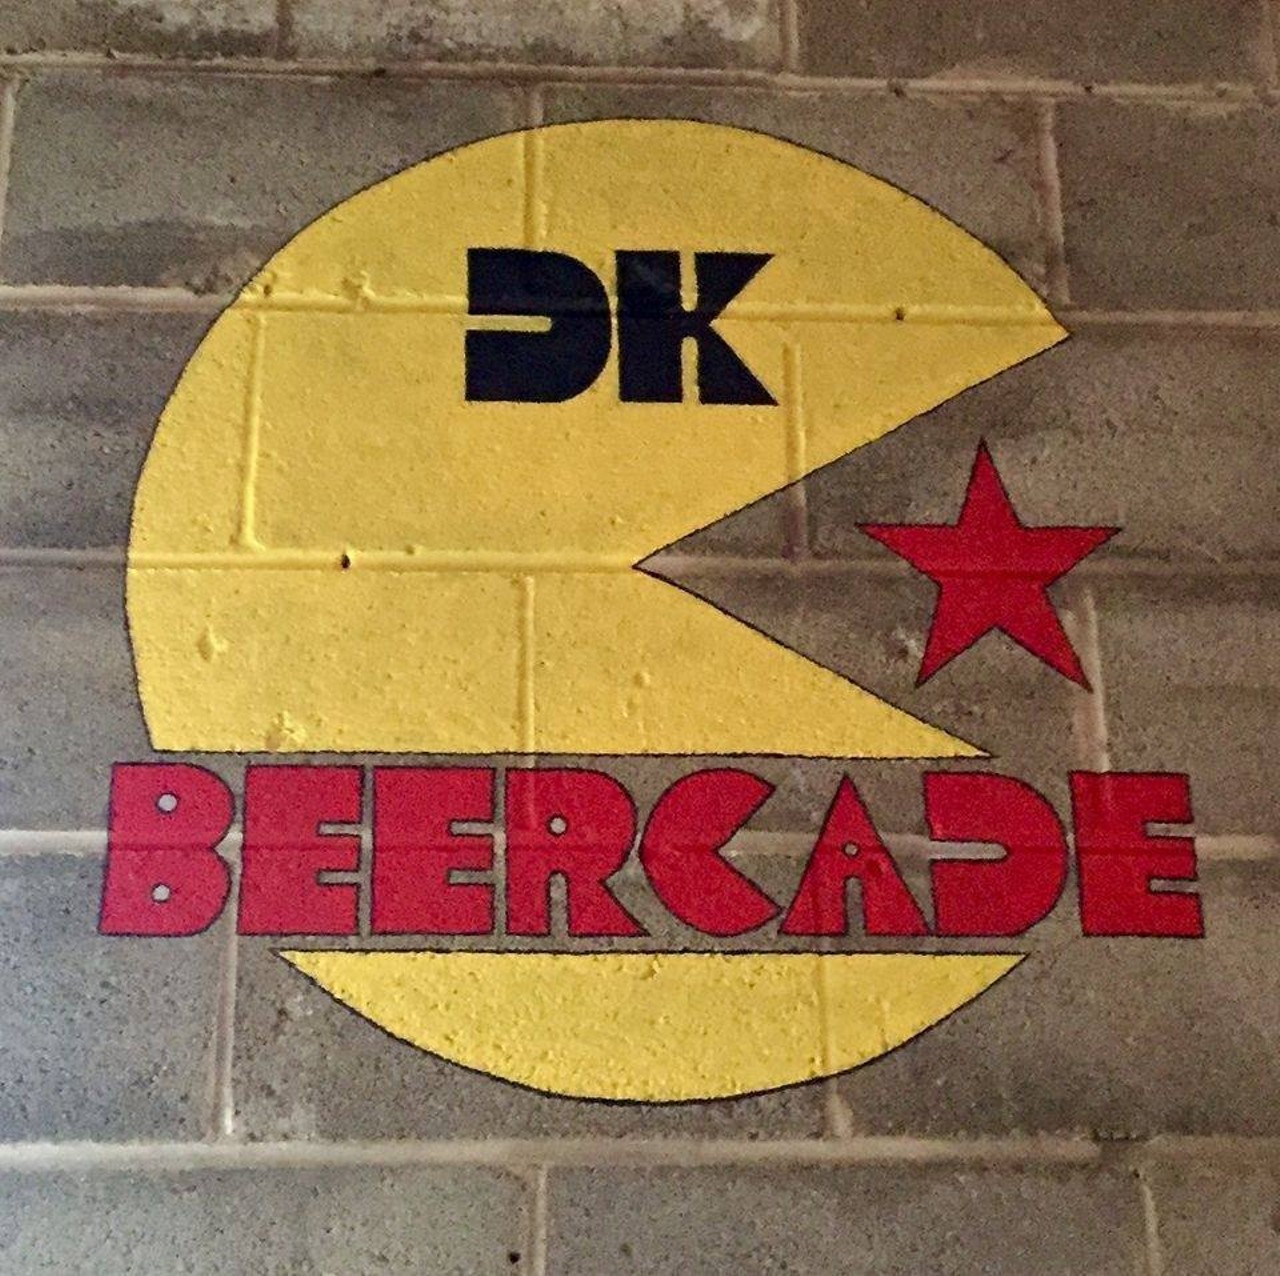  DK Beercade   
36470 Jefferson Ave., Harrison Charter Township; 586-463-8258
Located inside of Terry&#146;s Terrace, this is a cozy room to kick back with friends with a drink in one hand and a joystick in the other. This beercade&#146;s walls are lined with vintage arcade games, all listed on their website &#151; check to see if your favorites are on their list! 
Photo via Jobbie Crew 